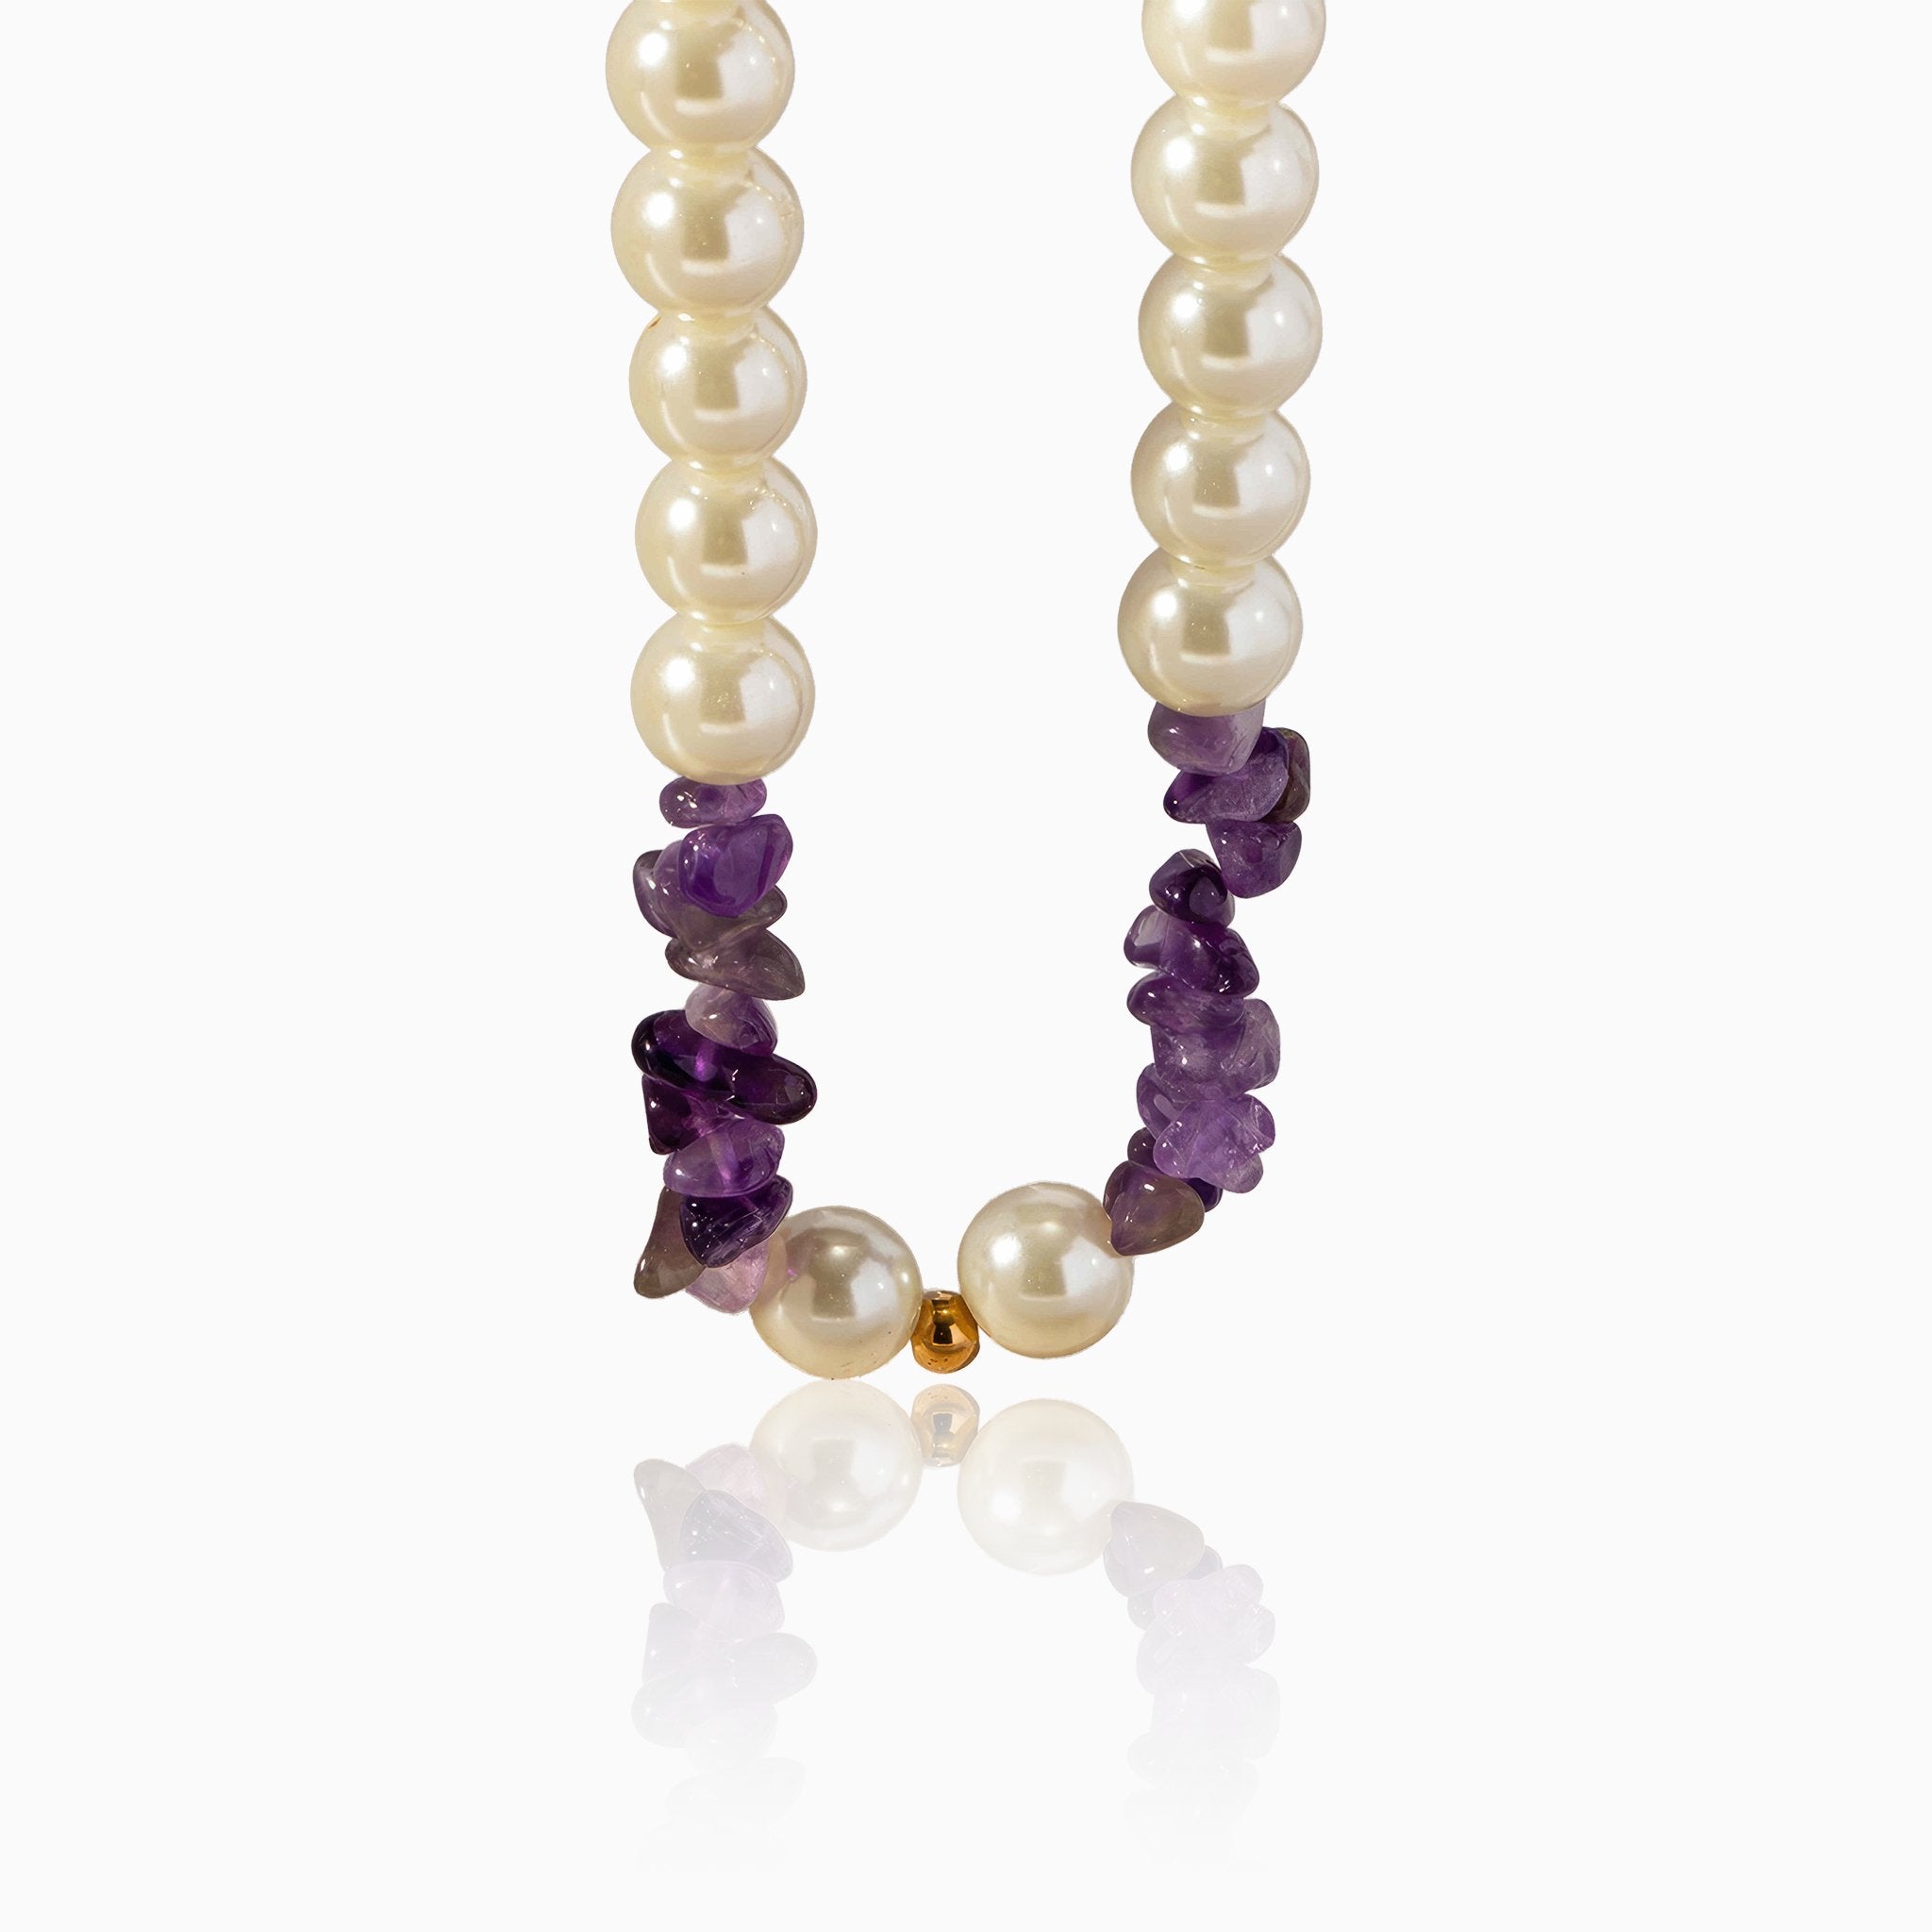 Vintage Pearl & Amethyst Necklace - Nobbier - Necklace - 18K Gold And Titanium PVD Coated Jewelry